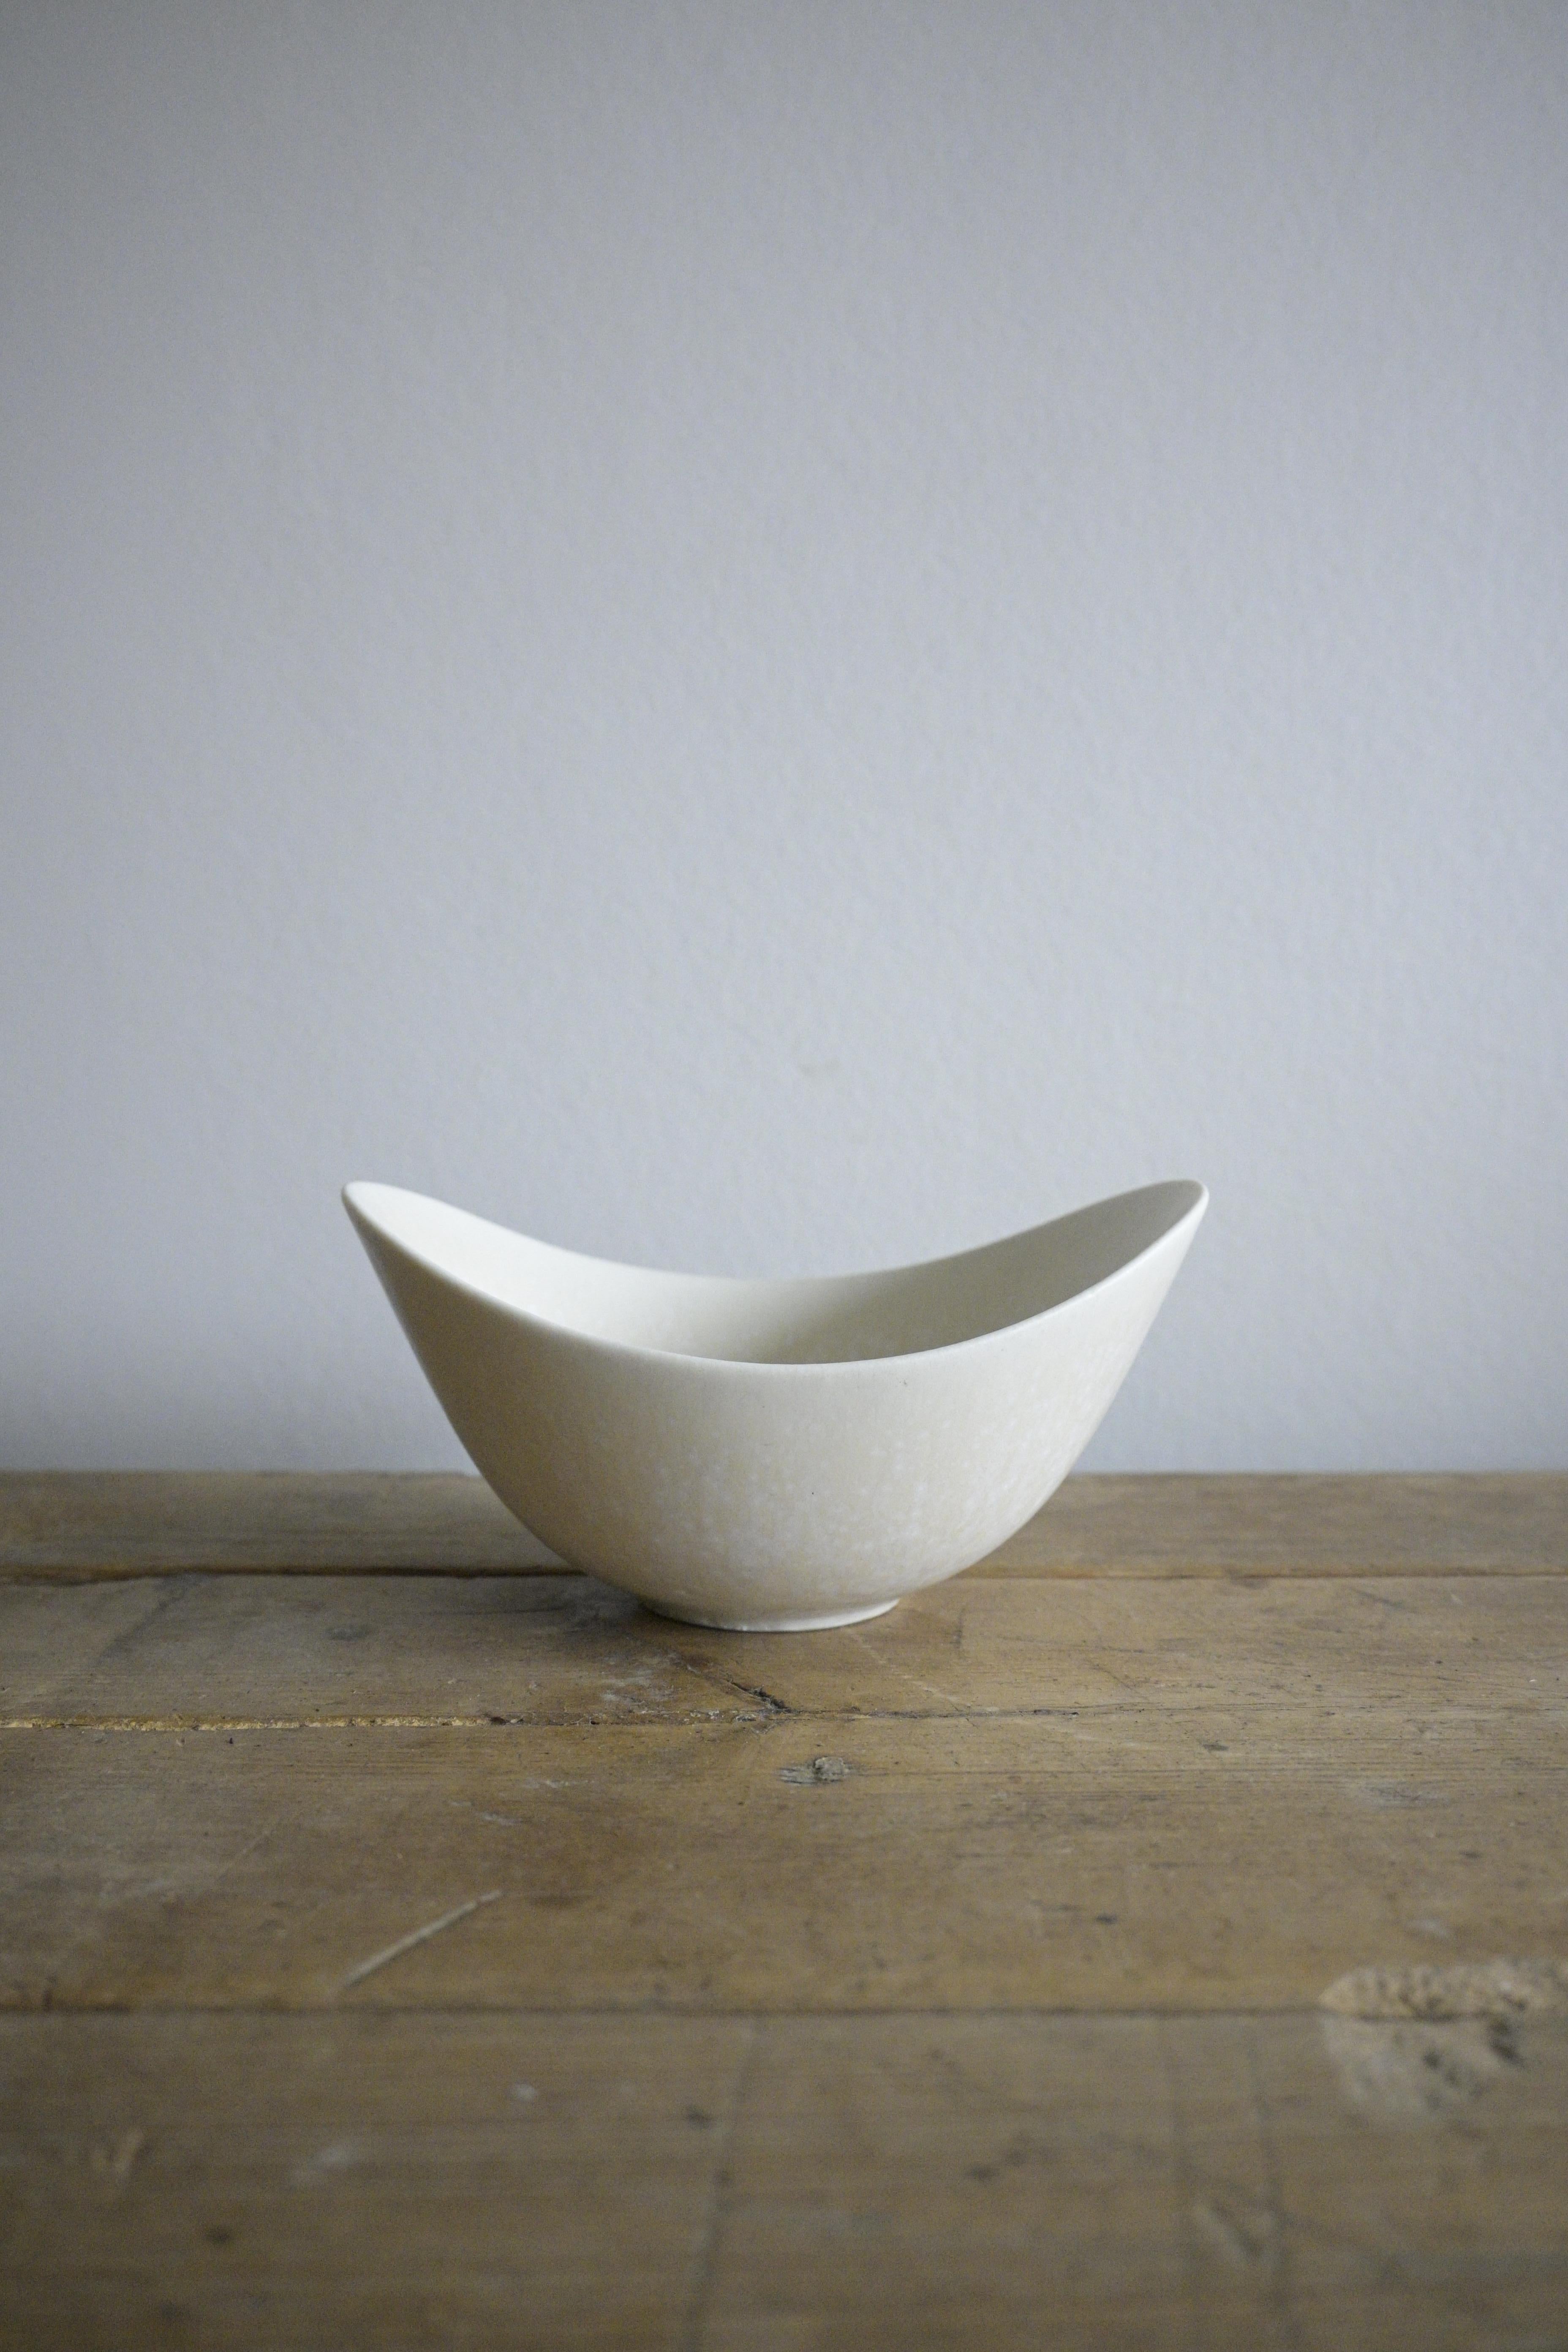 Rare Egg-shell Mimosa White Bowl by Gunnar Nylund for Rörstrand, Sweden, 1950s

The vase is marked as 1st quality and is in good condition.

Heigth: 8 cm/3.1 inch
Depth: 12 cm/4.7 inch
Widht: 16 cm/6.2 inch

Gunnar Nylund (1904-1997) was a renowned